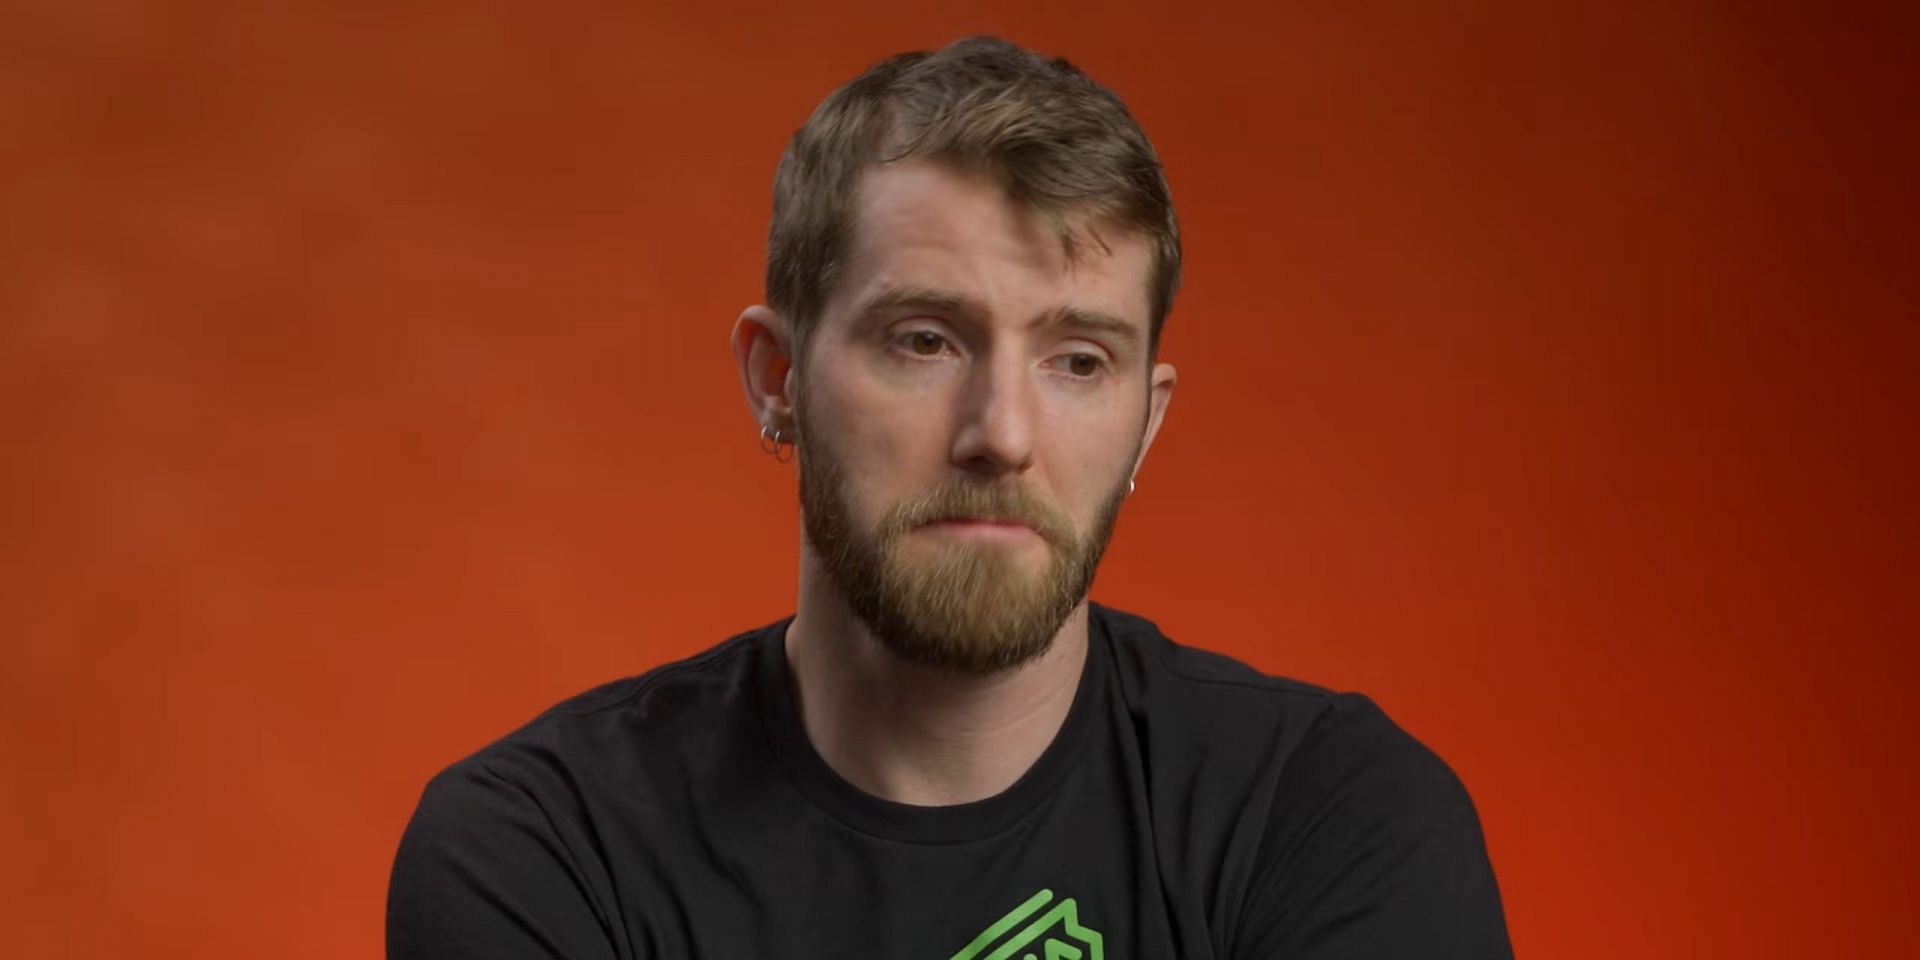 What is next for Linus? Iconic tech YouTuber steps down from position ...